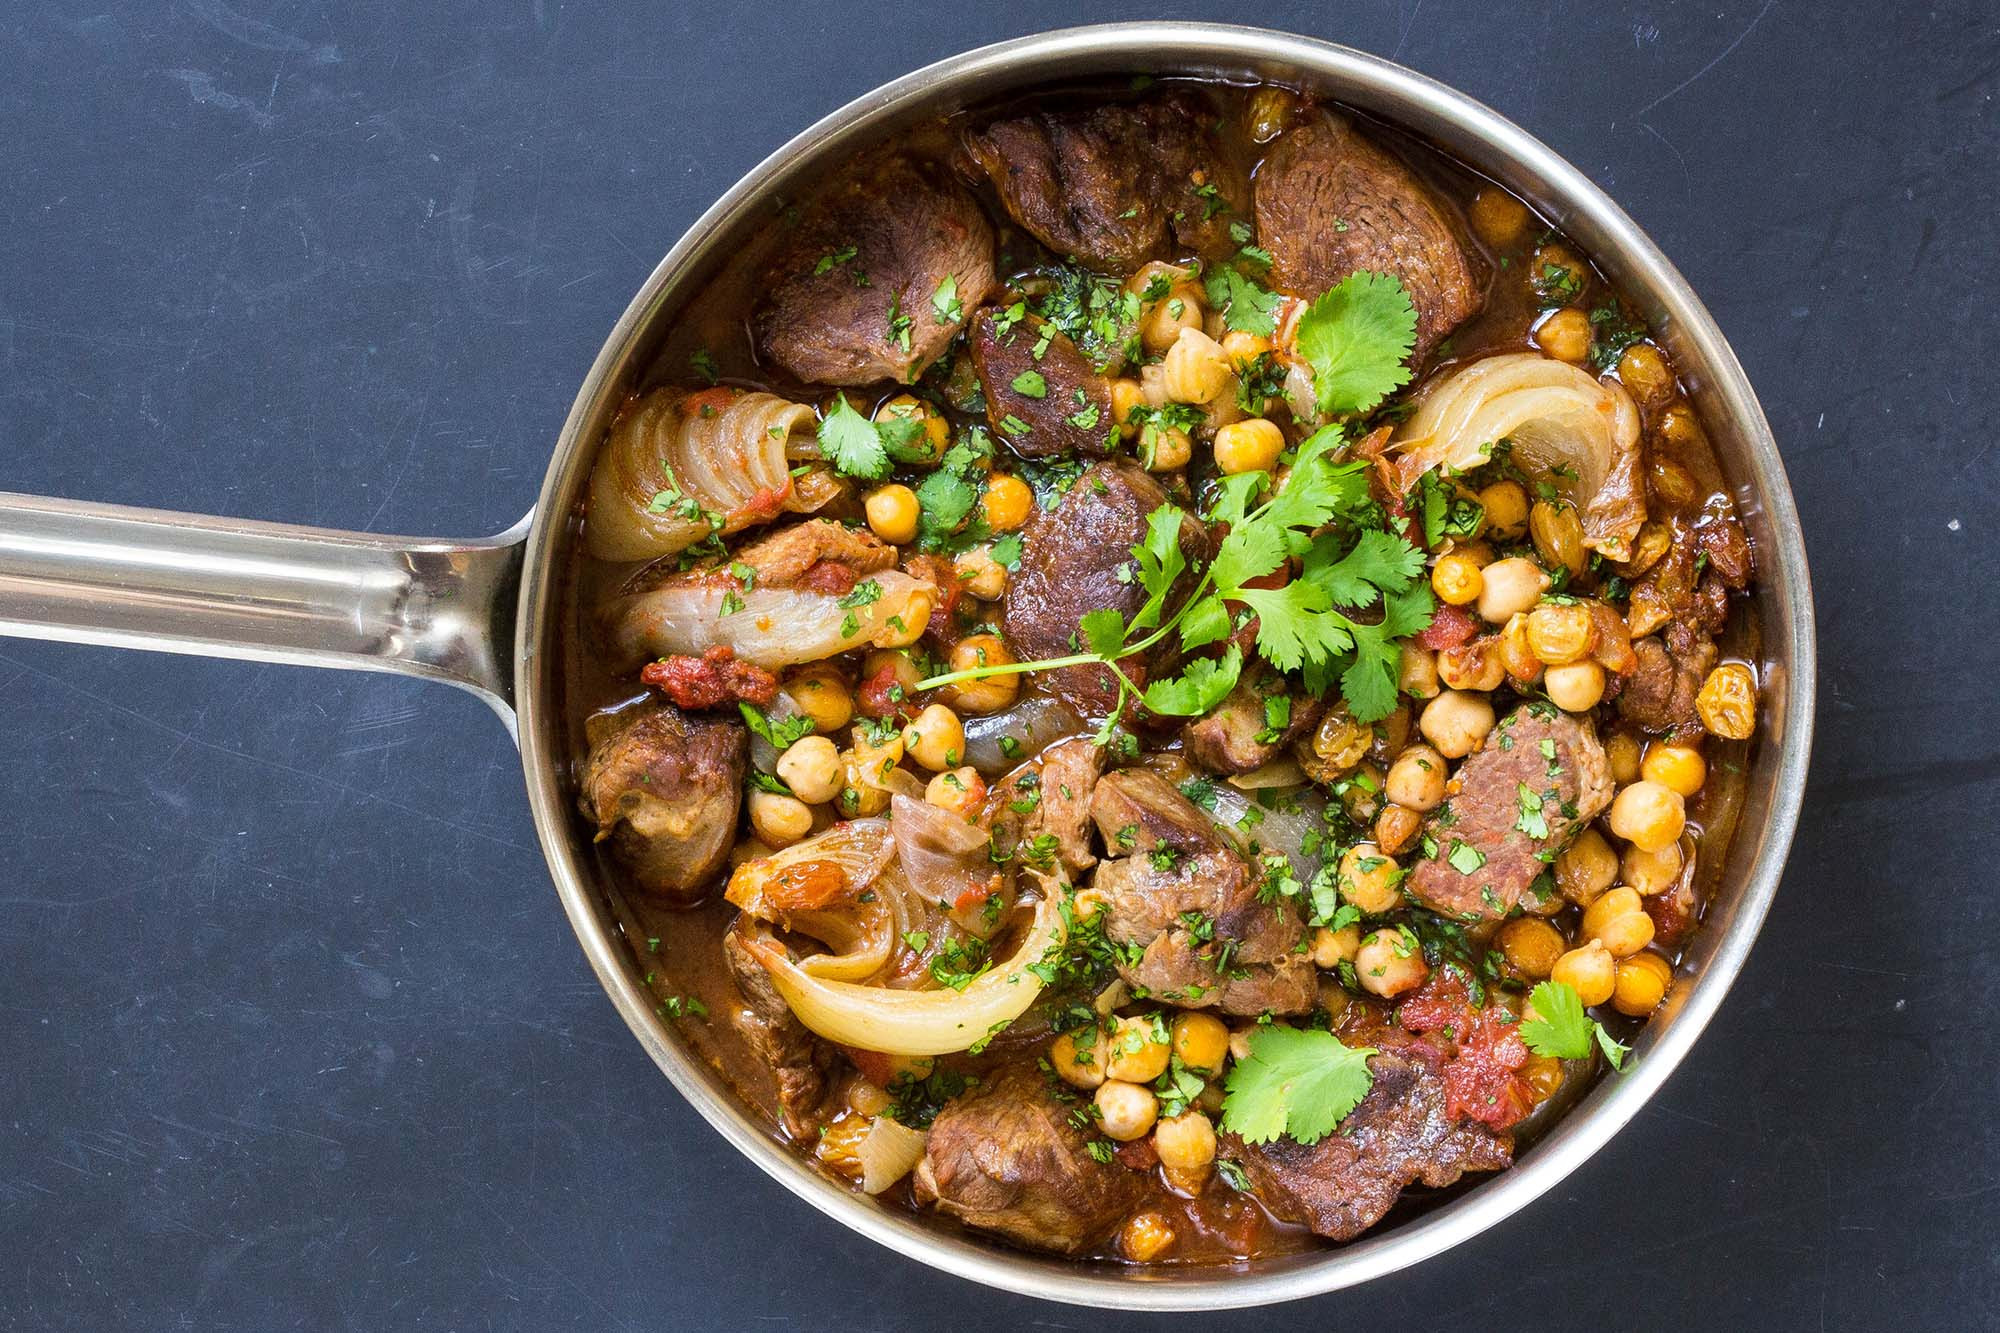 Recipes For Lamb Stew
 Spicy Lamb Stew with Chickpeas Recipe